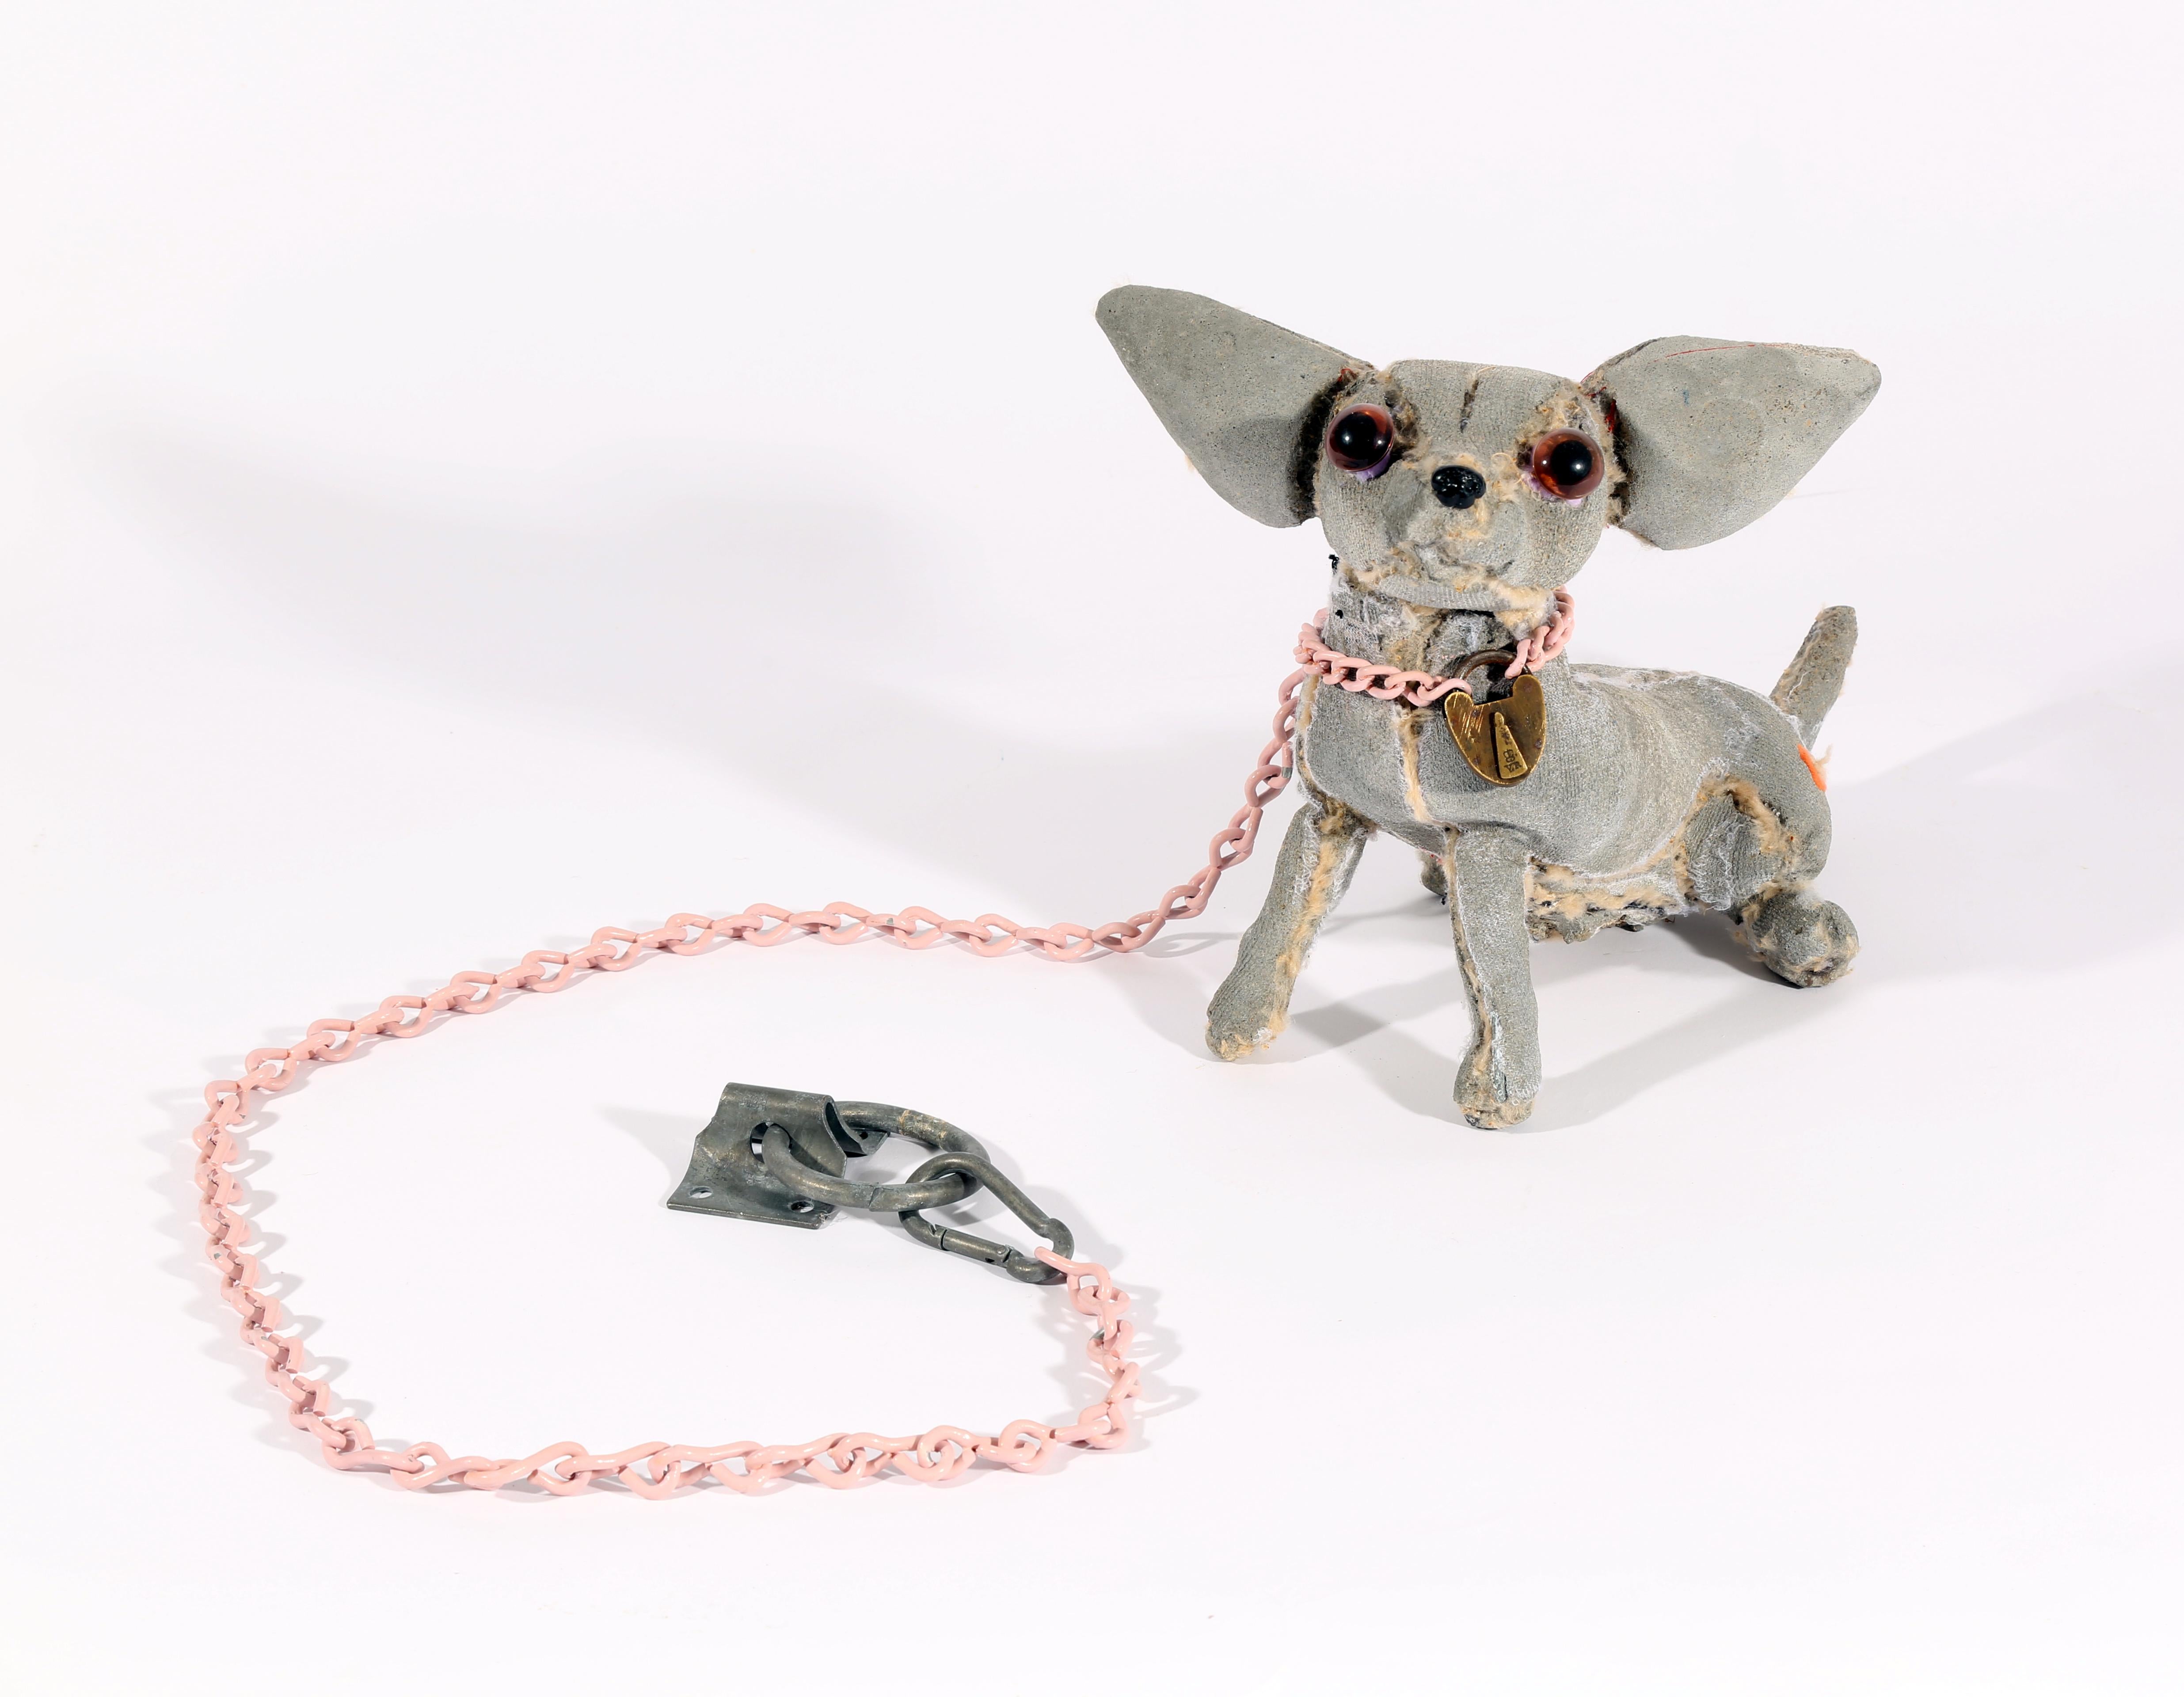 Ross Bonfanti Figurative Sculpture - Chihuahua with Pink Chain 